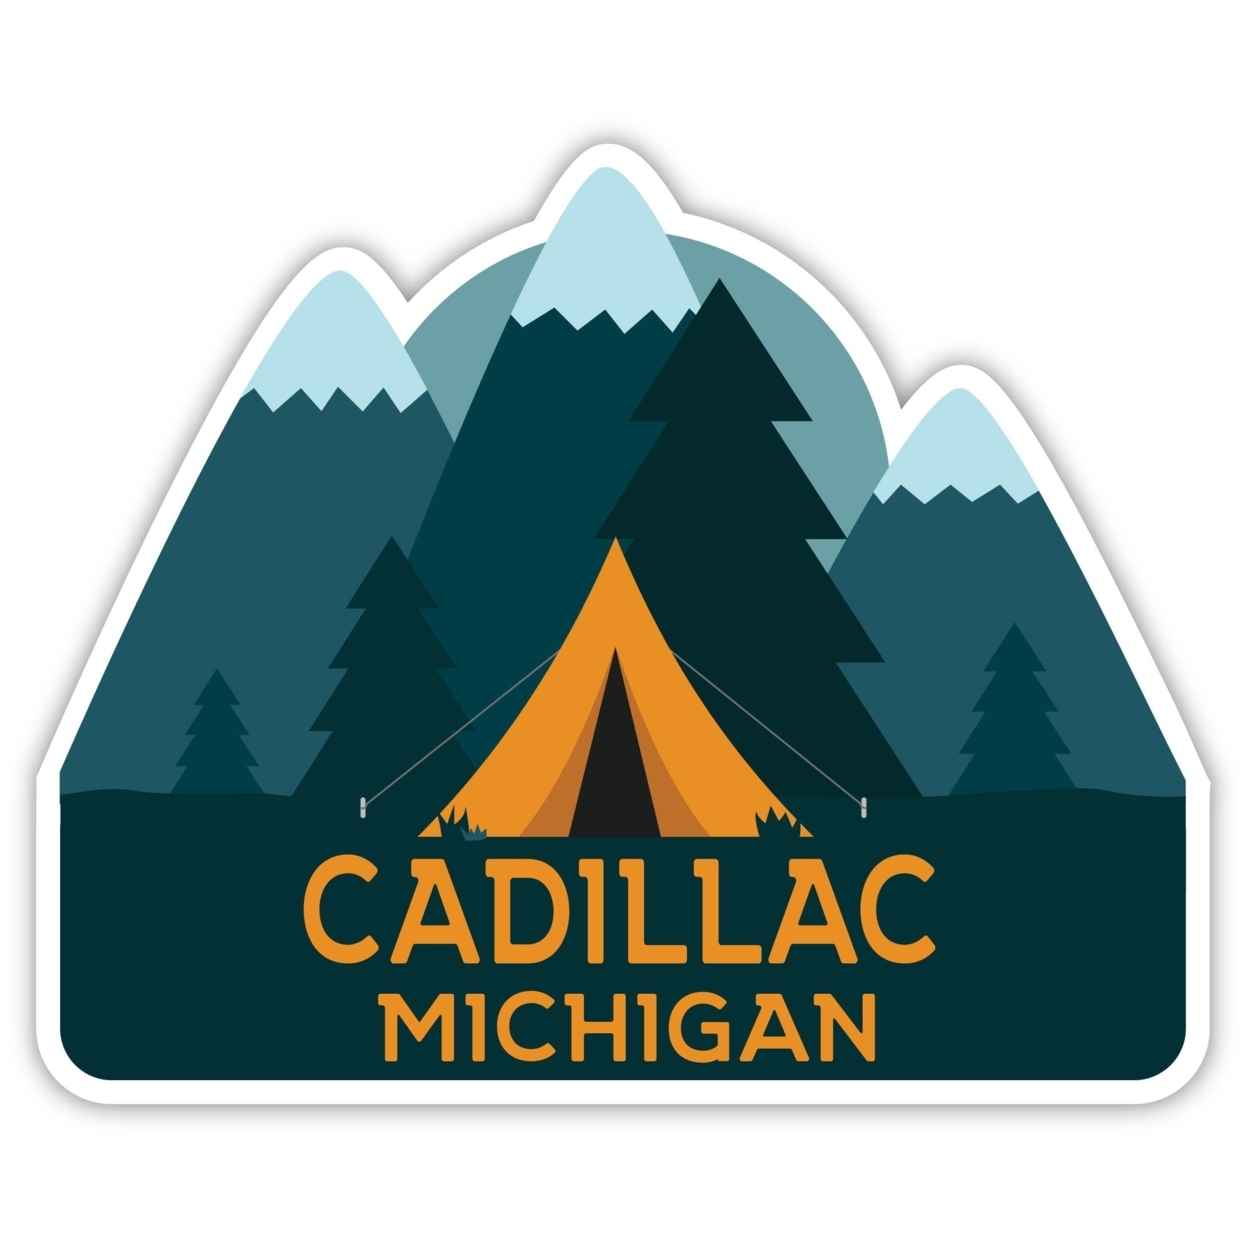 Cadillac Michigan Souvenir Decorative Stickers (Choose Theme And Size) - 4-Pack, 2-Inch, Tent